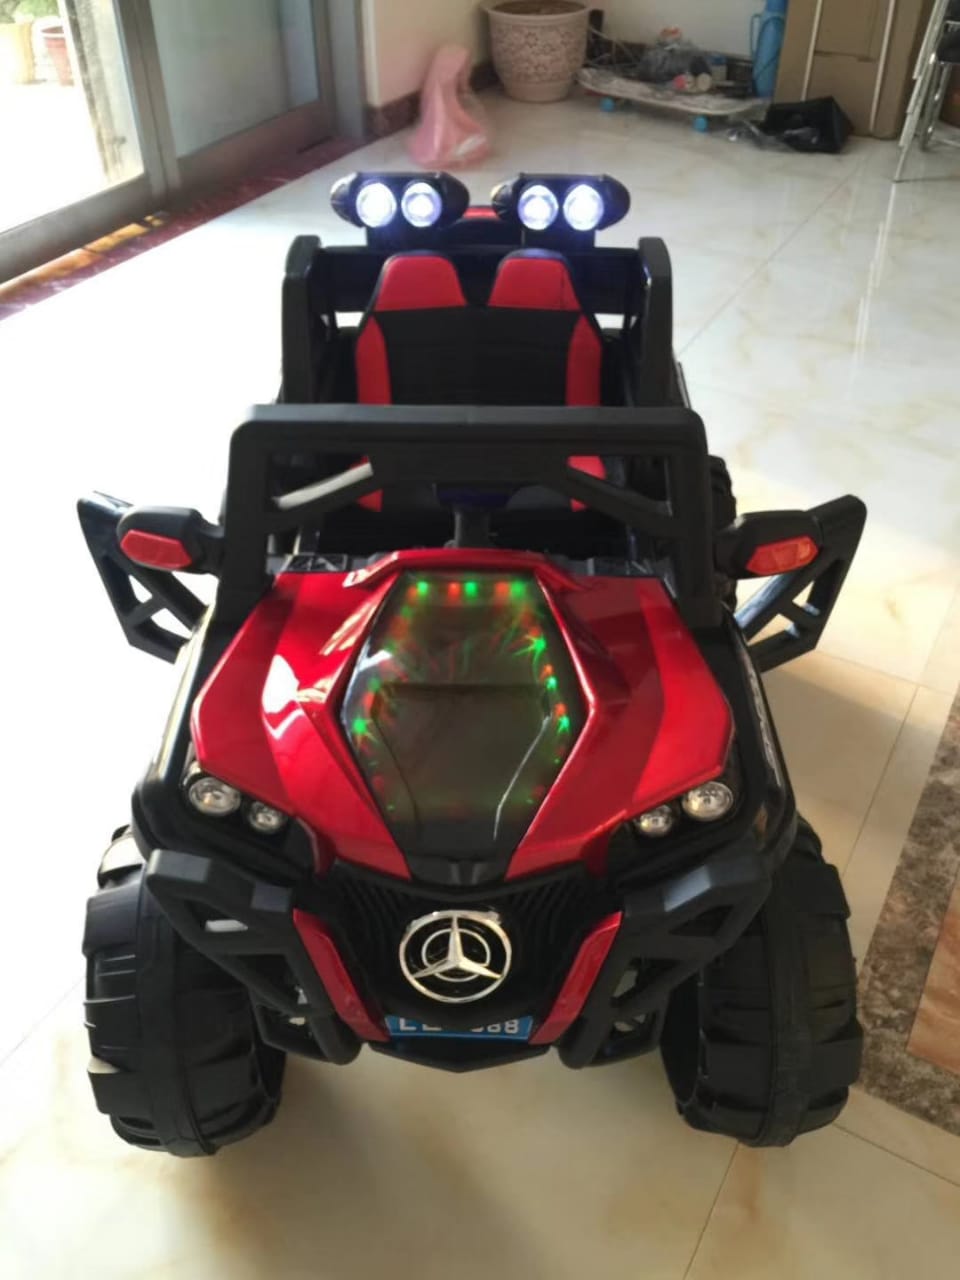 New Jumbo size Kids Electric Cars Four-wheel Drive 1-14 Years age Children RC Riding Toy Off-road jeep Vehicle Ride on 2188 - samstoy.in